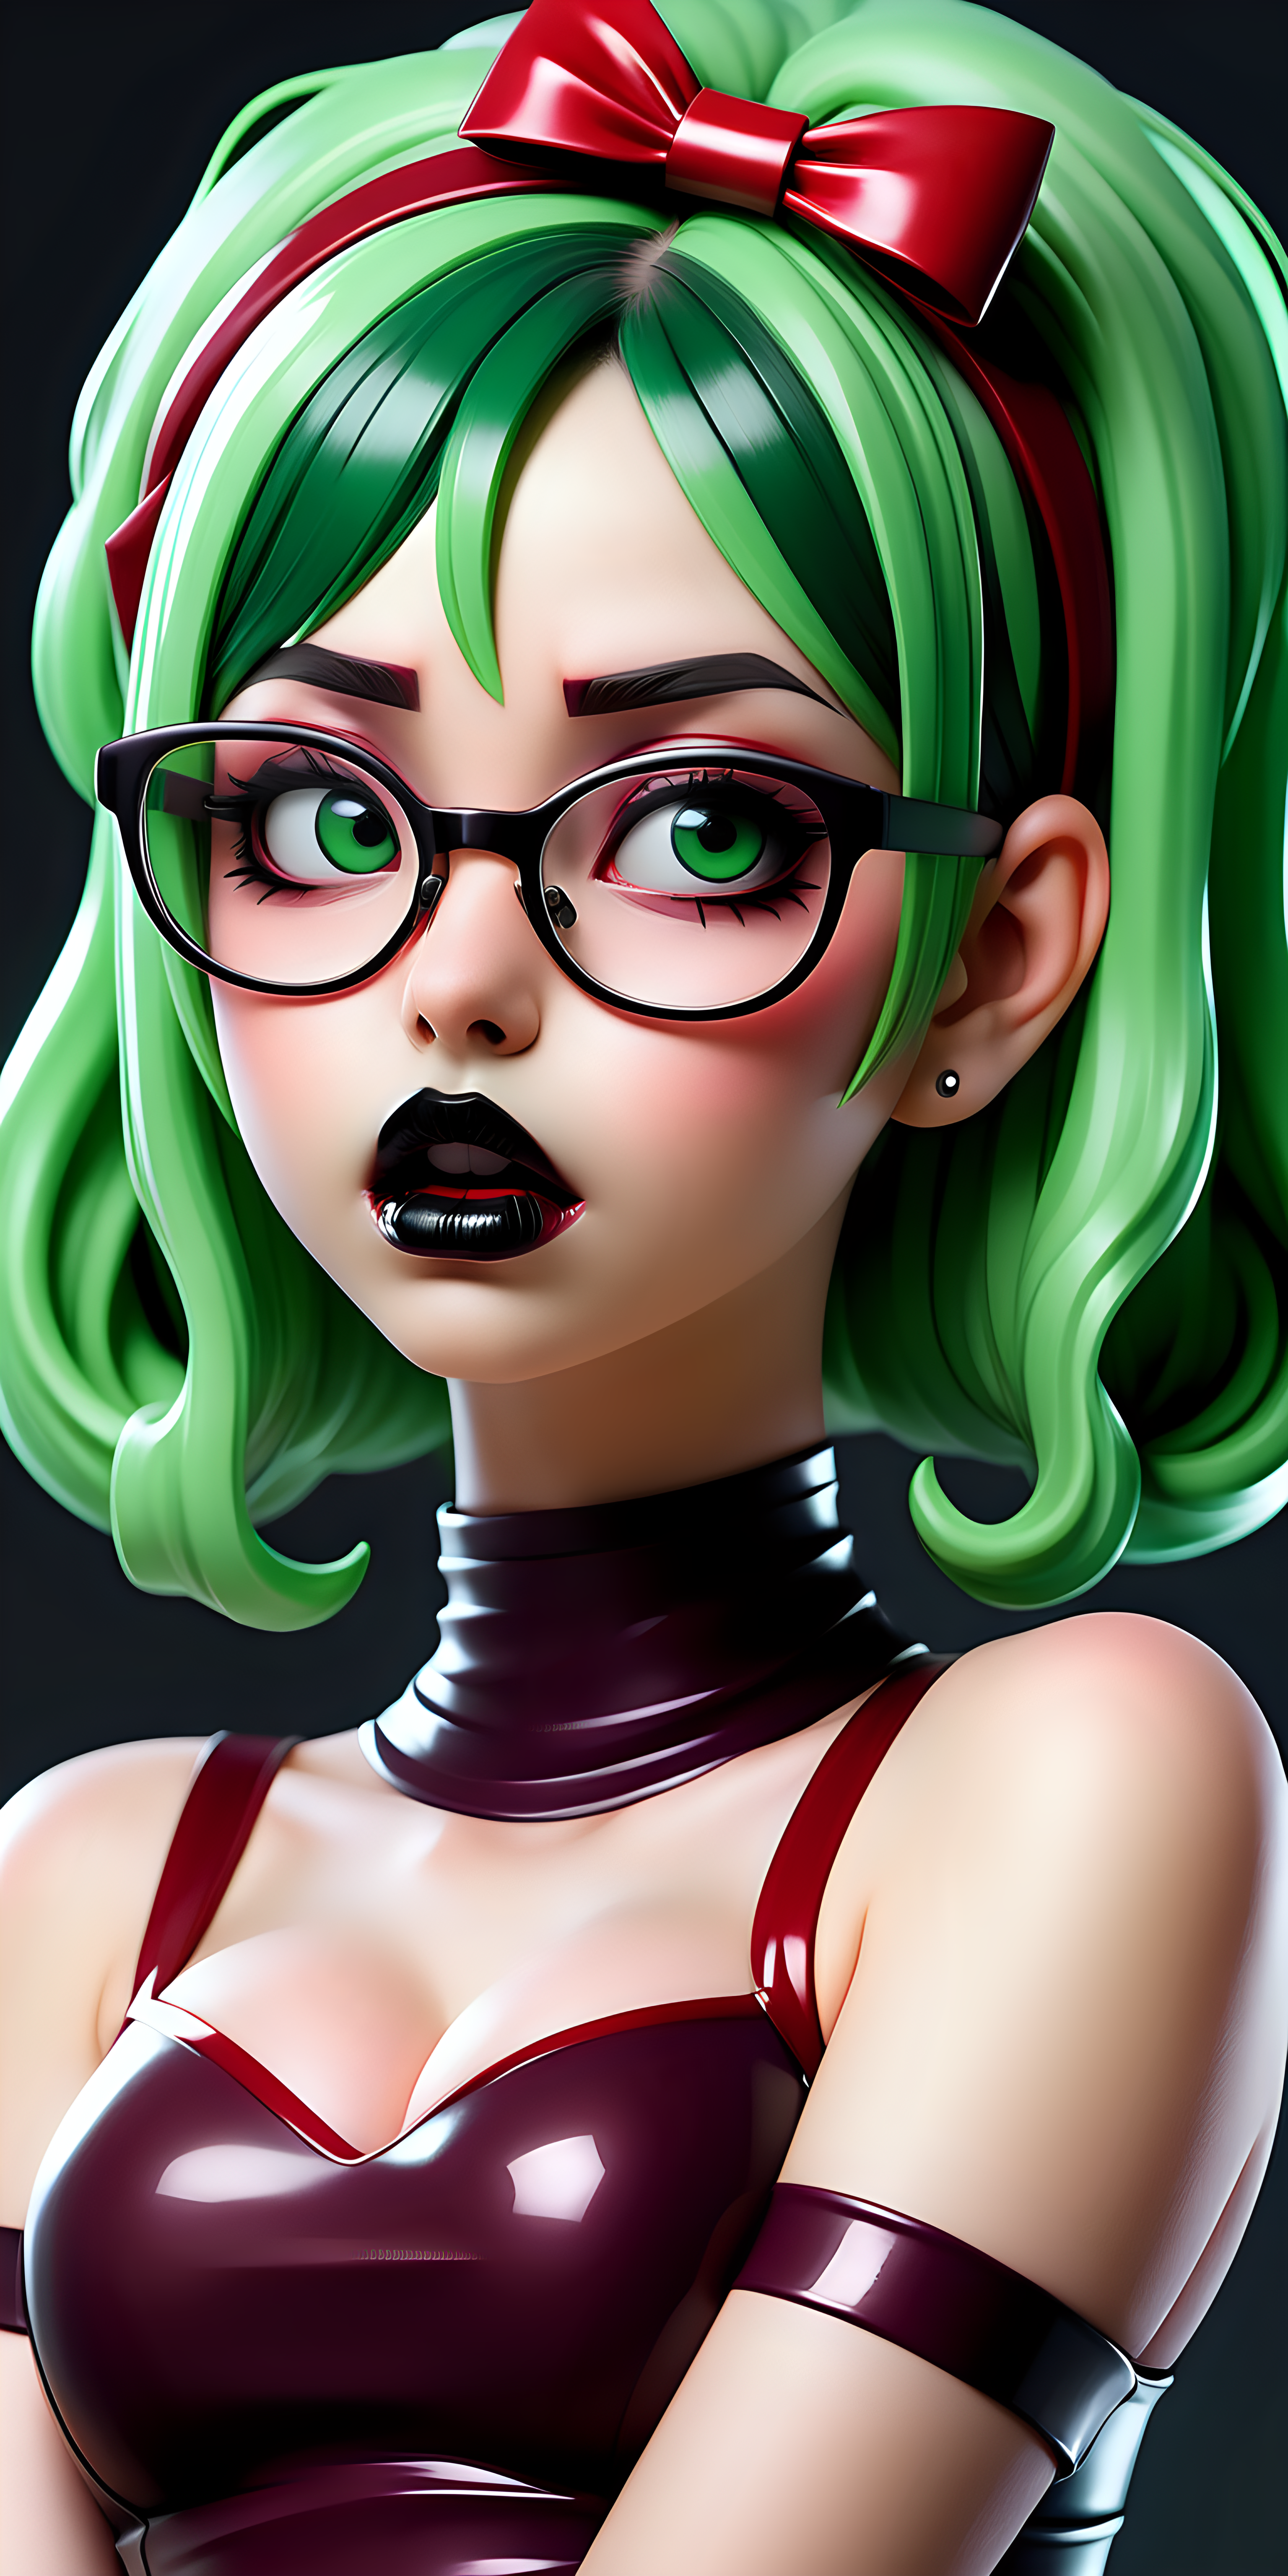 Anime Woman with green hair, large lips with dark lipstick and dark heavy makeup, wearing glasses, wearing a hair band wearing a shiny red latex dress, vacant expression, tiny waist, wide hips, large breasts